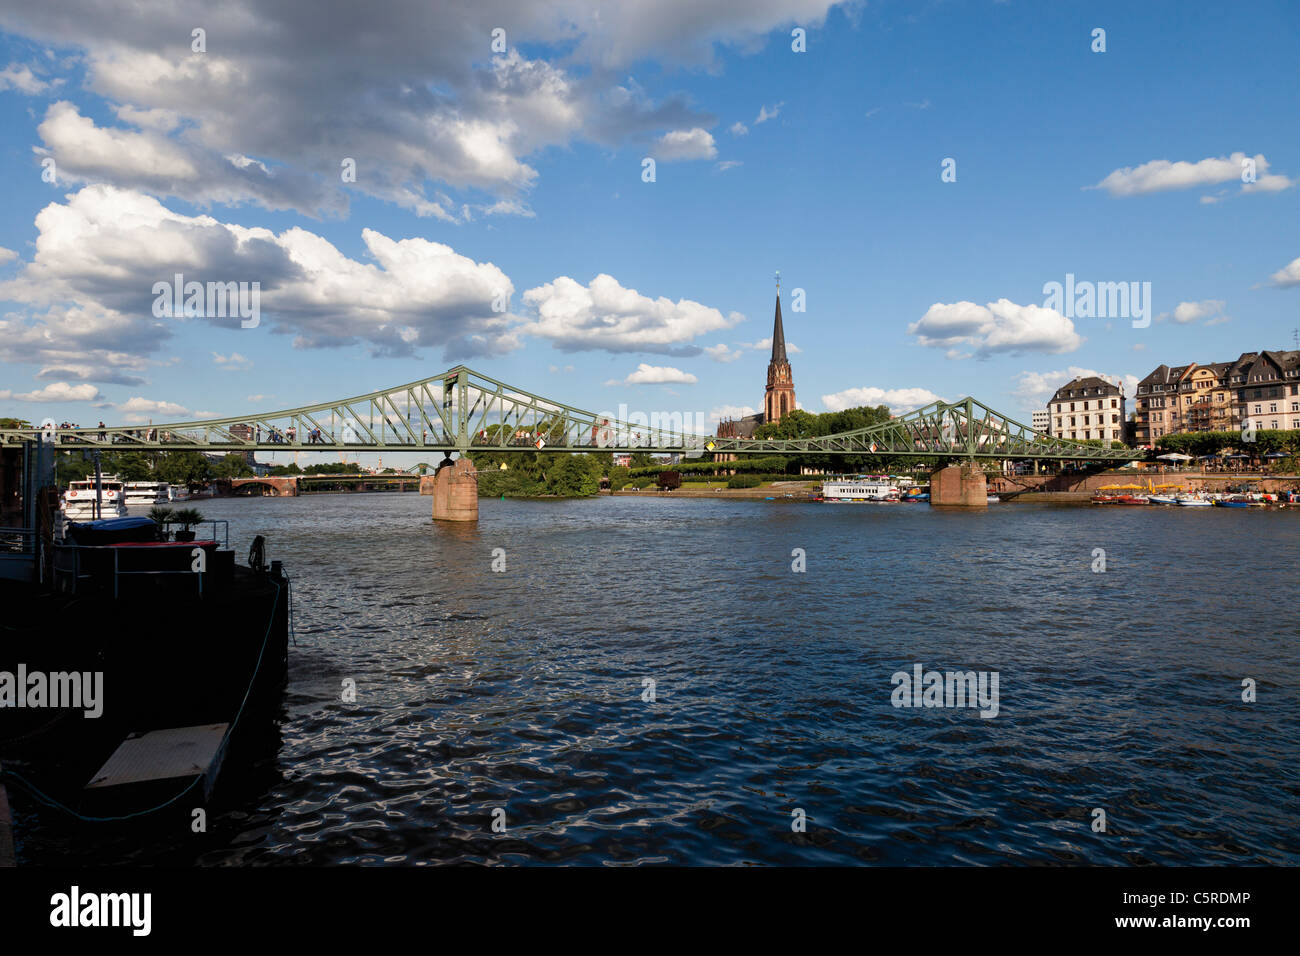 Europe, Germany, Hesse, Frankfurt, View of Eiserner Steg with city in background Stock Photo